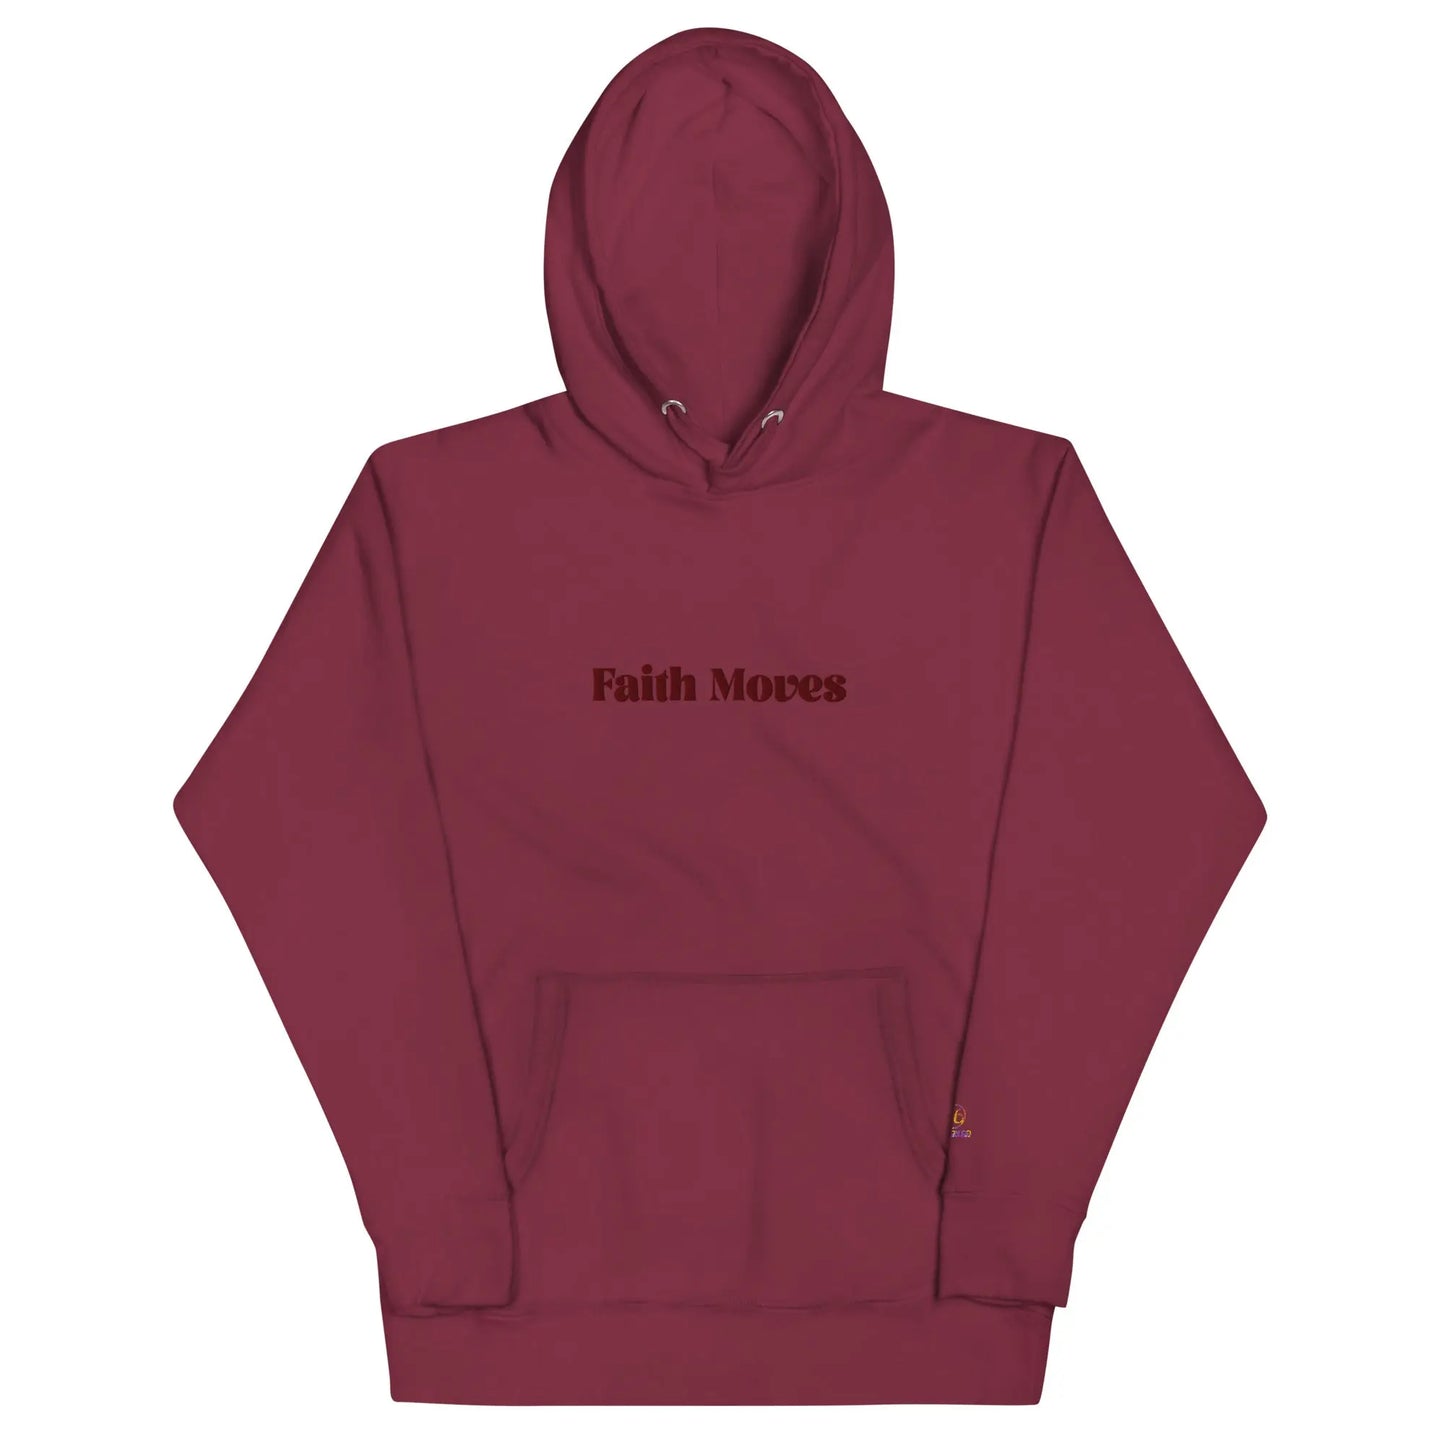 Unisex Embriodery " Faith Moves"  Hoodie